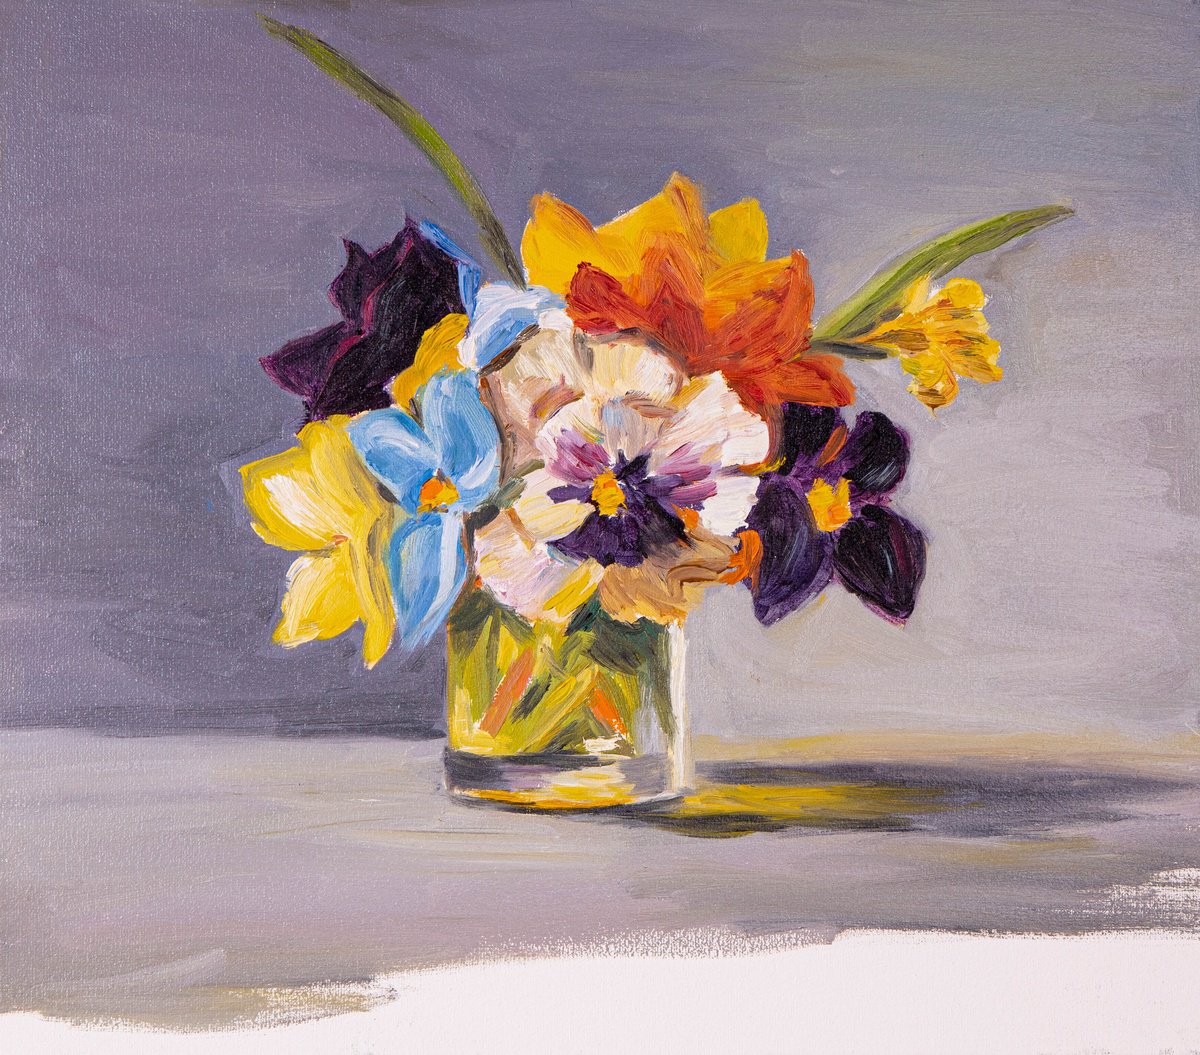 The Still Life with Flowers by Catherine Varadi